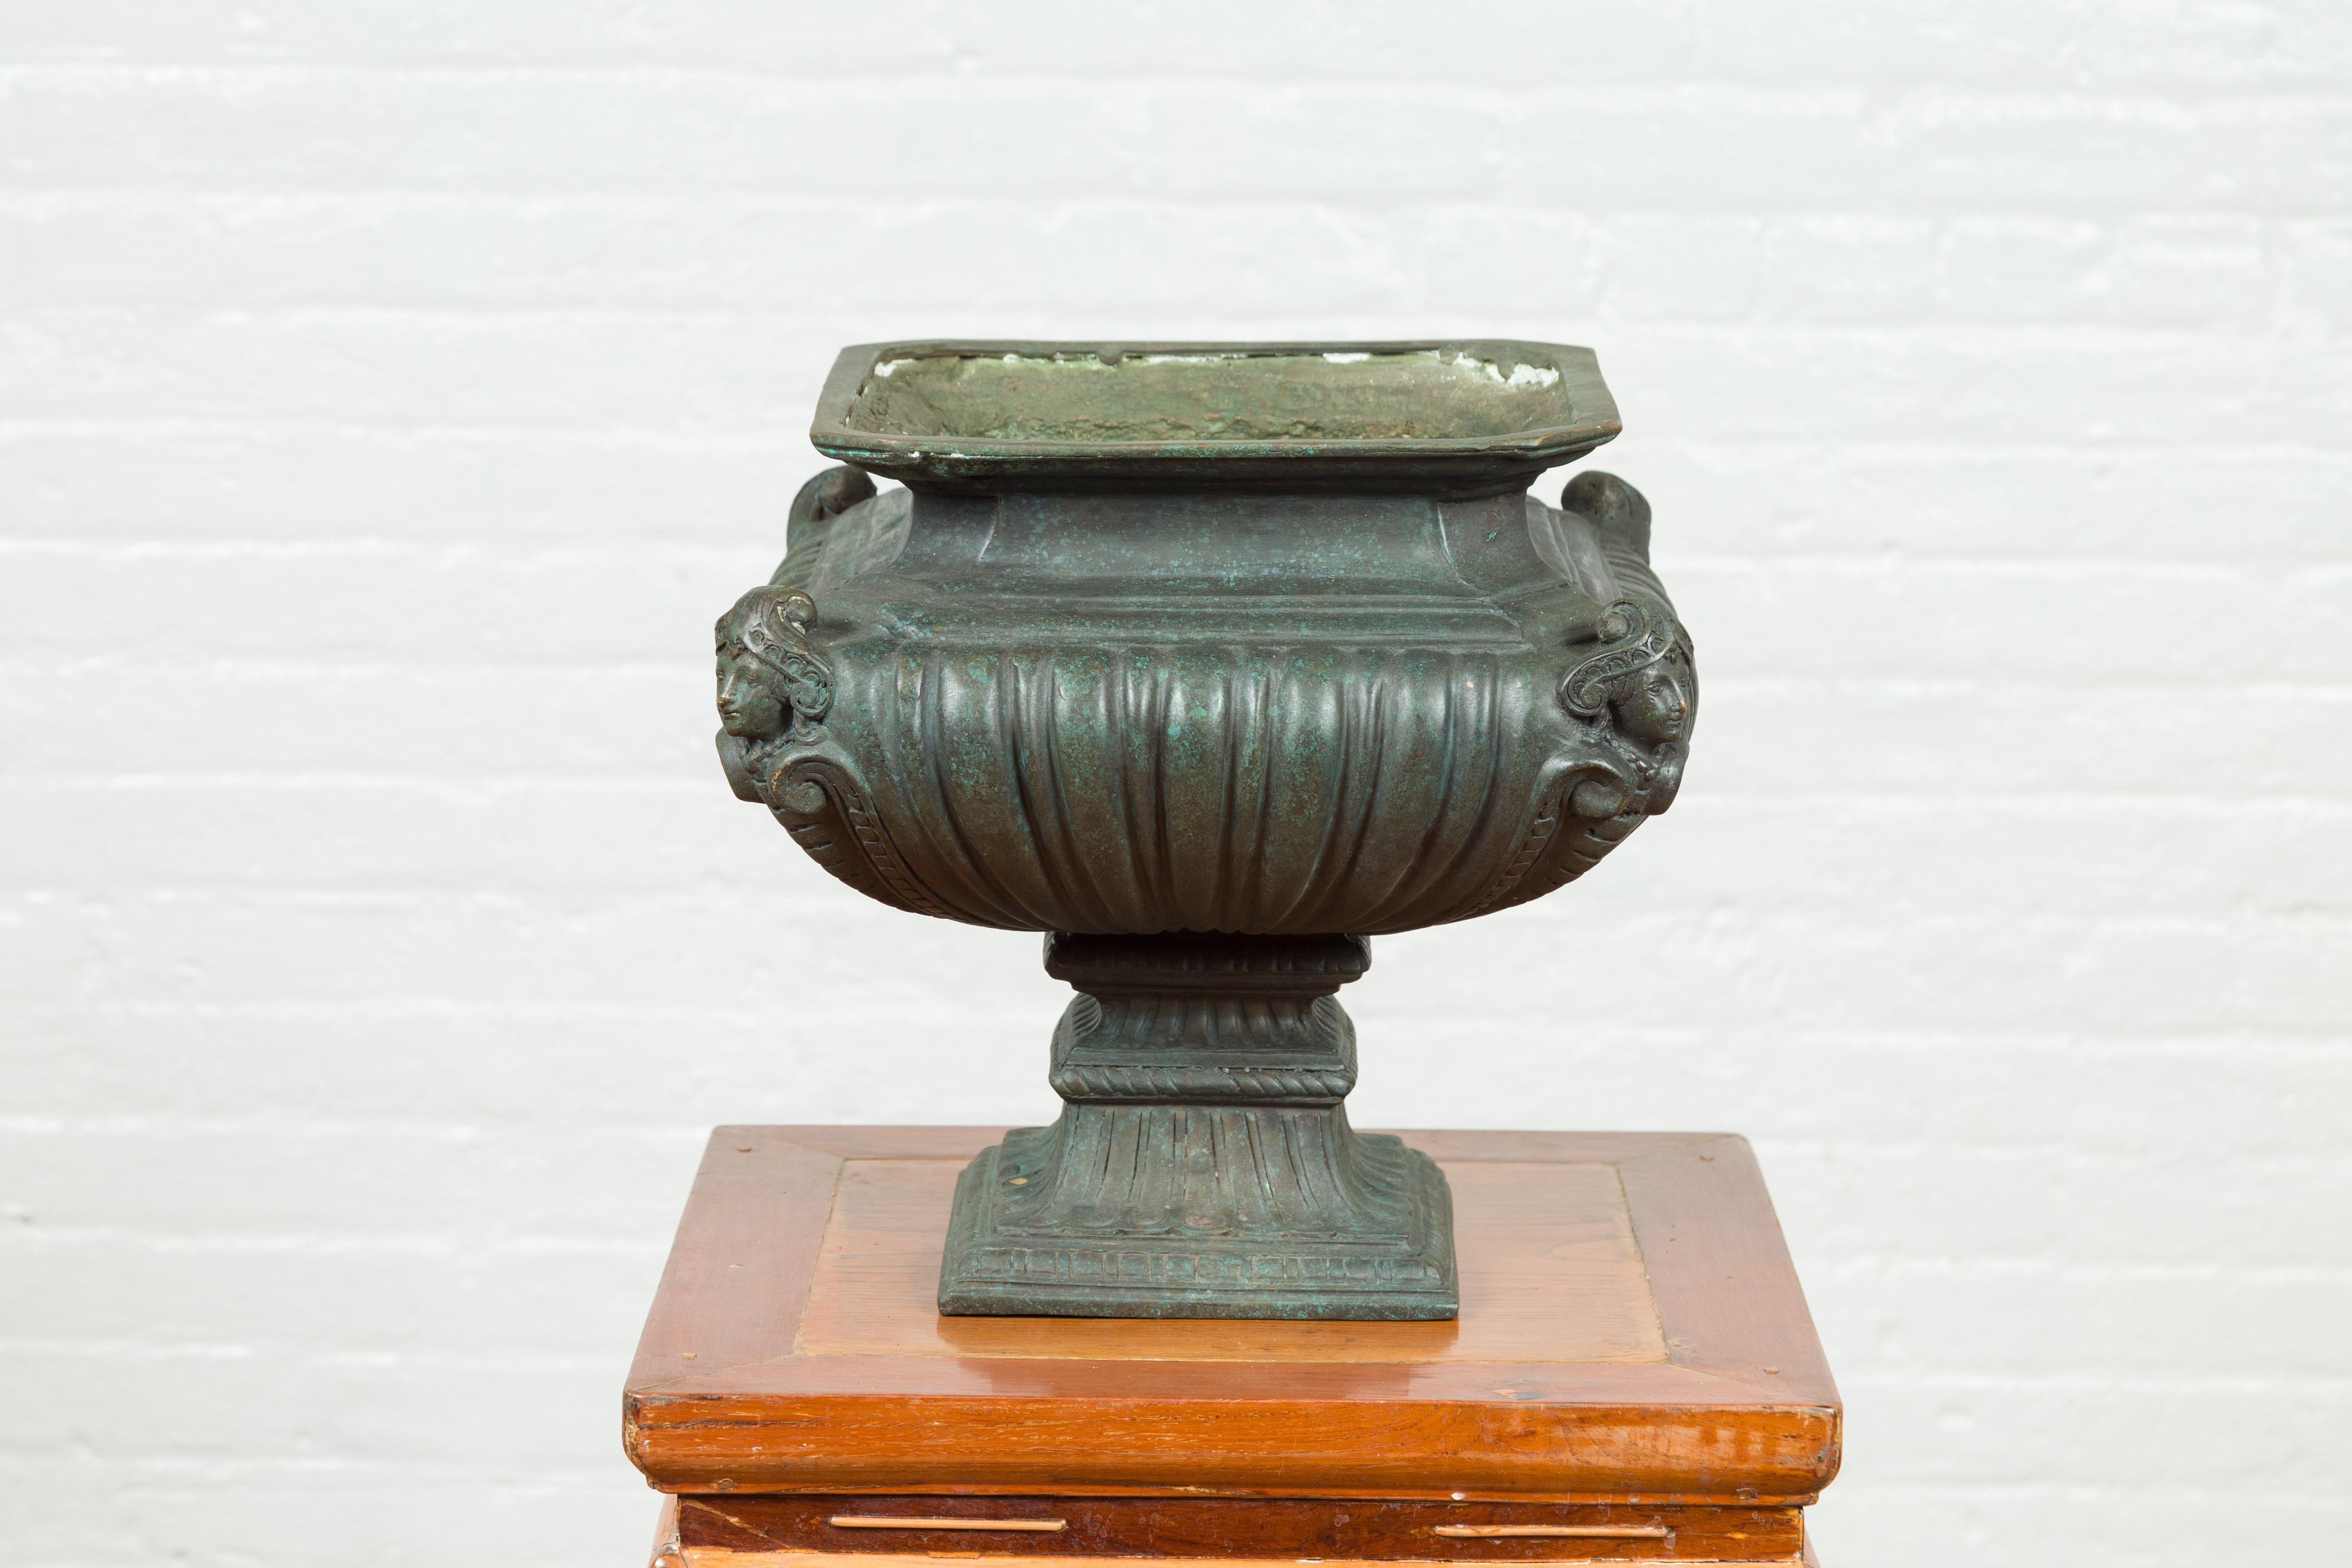 Contemporary Cast Bronze Planter with Figures, Gadroon Motifs and Verde Patina For Sale 9